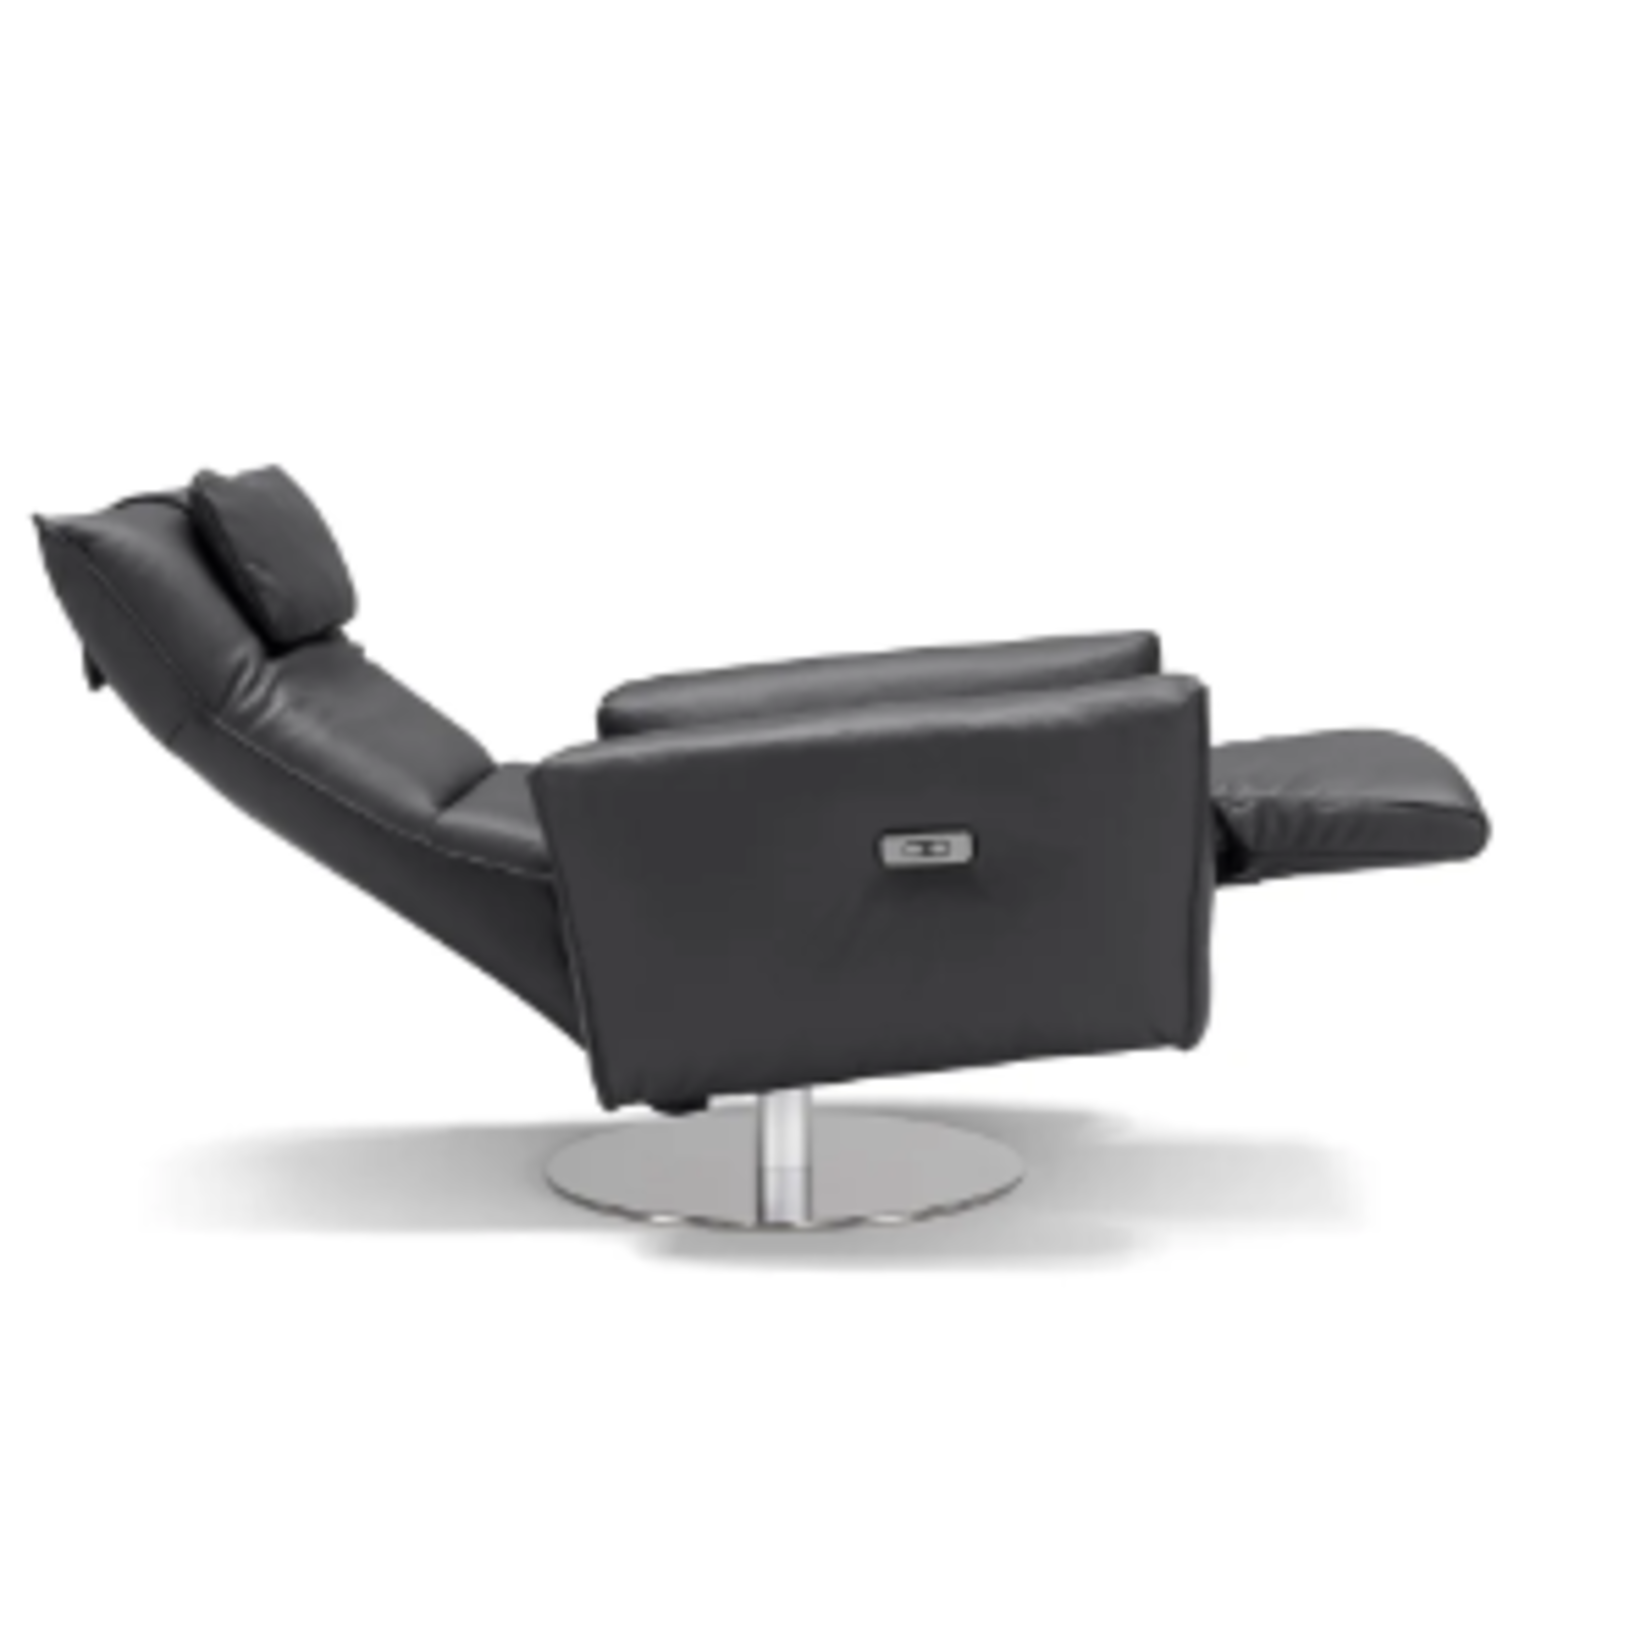 Bellini Modern Living Liliana Recliner Accent Chair Anthracite